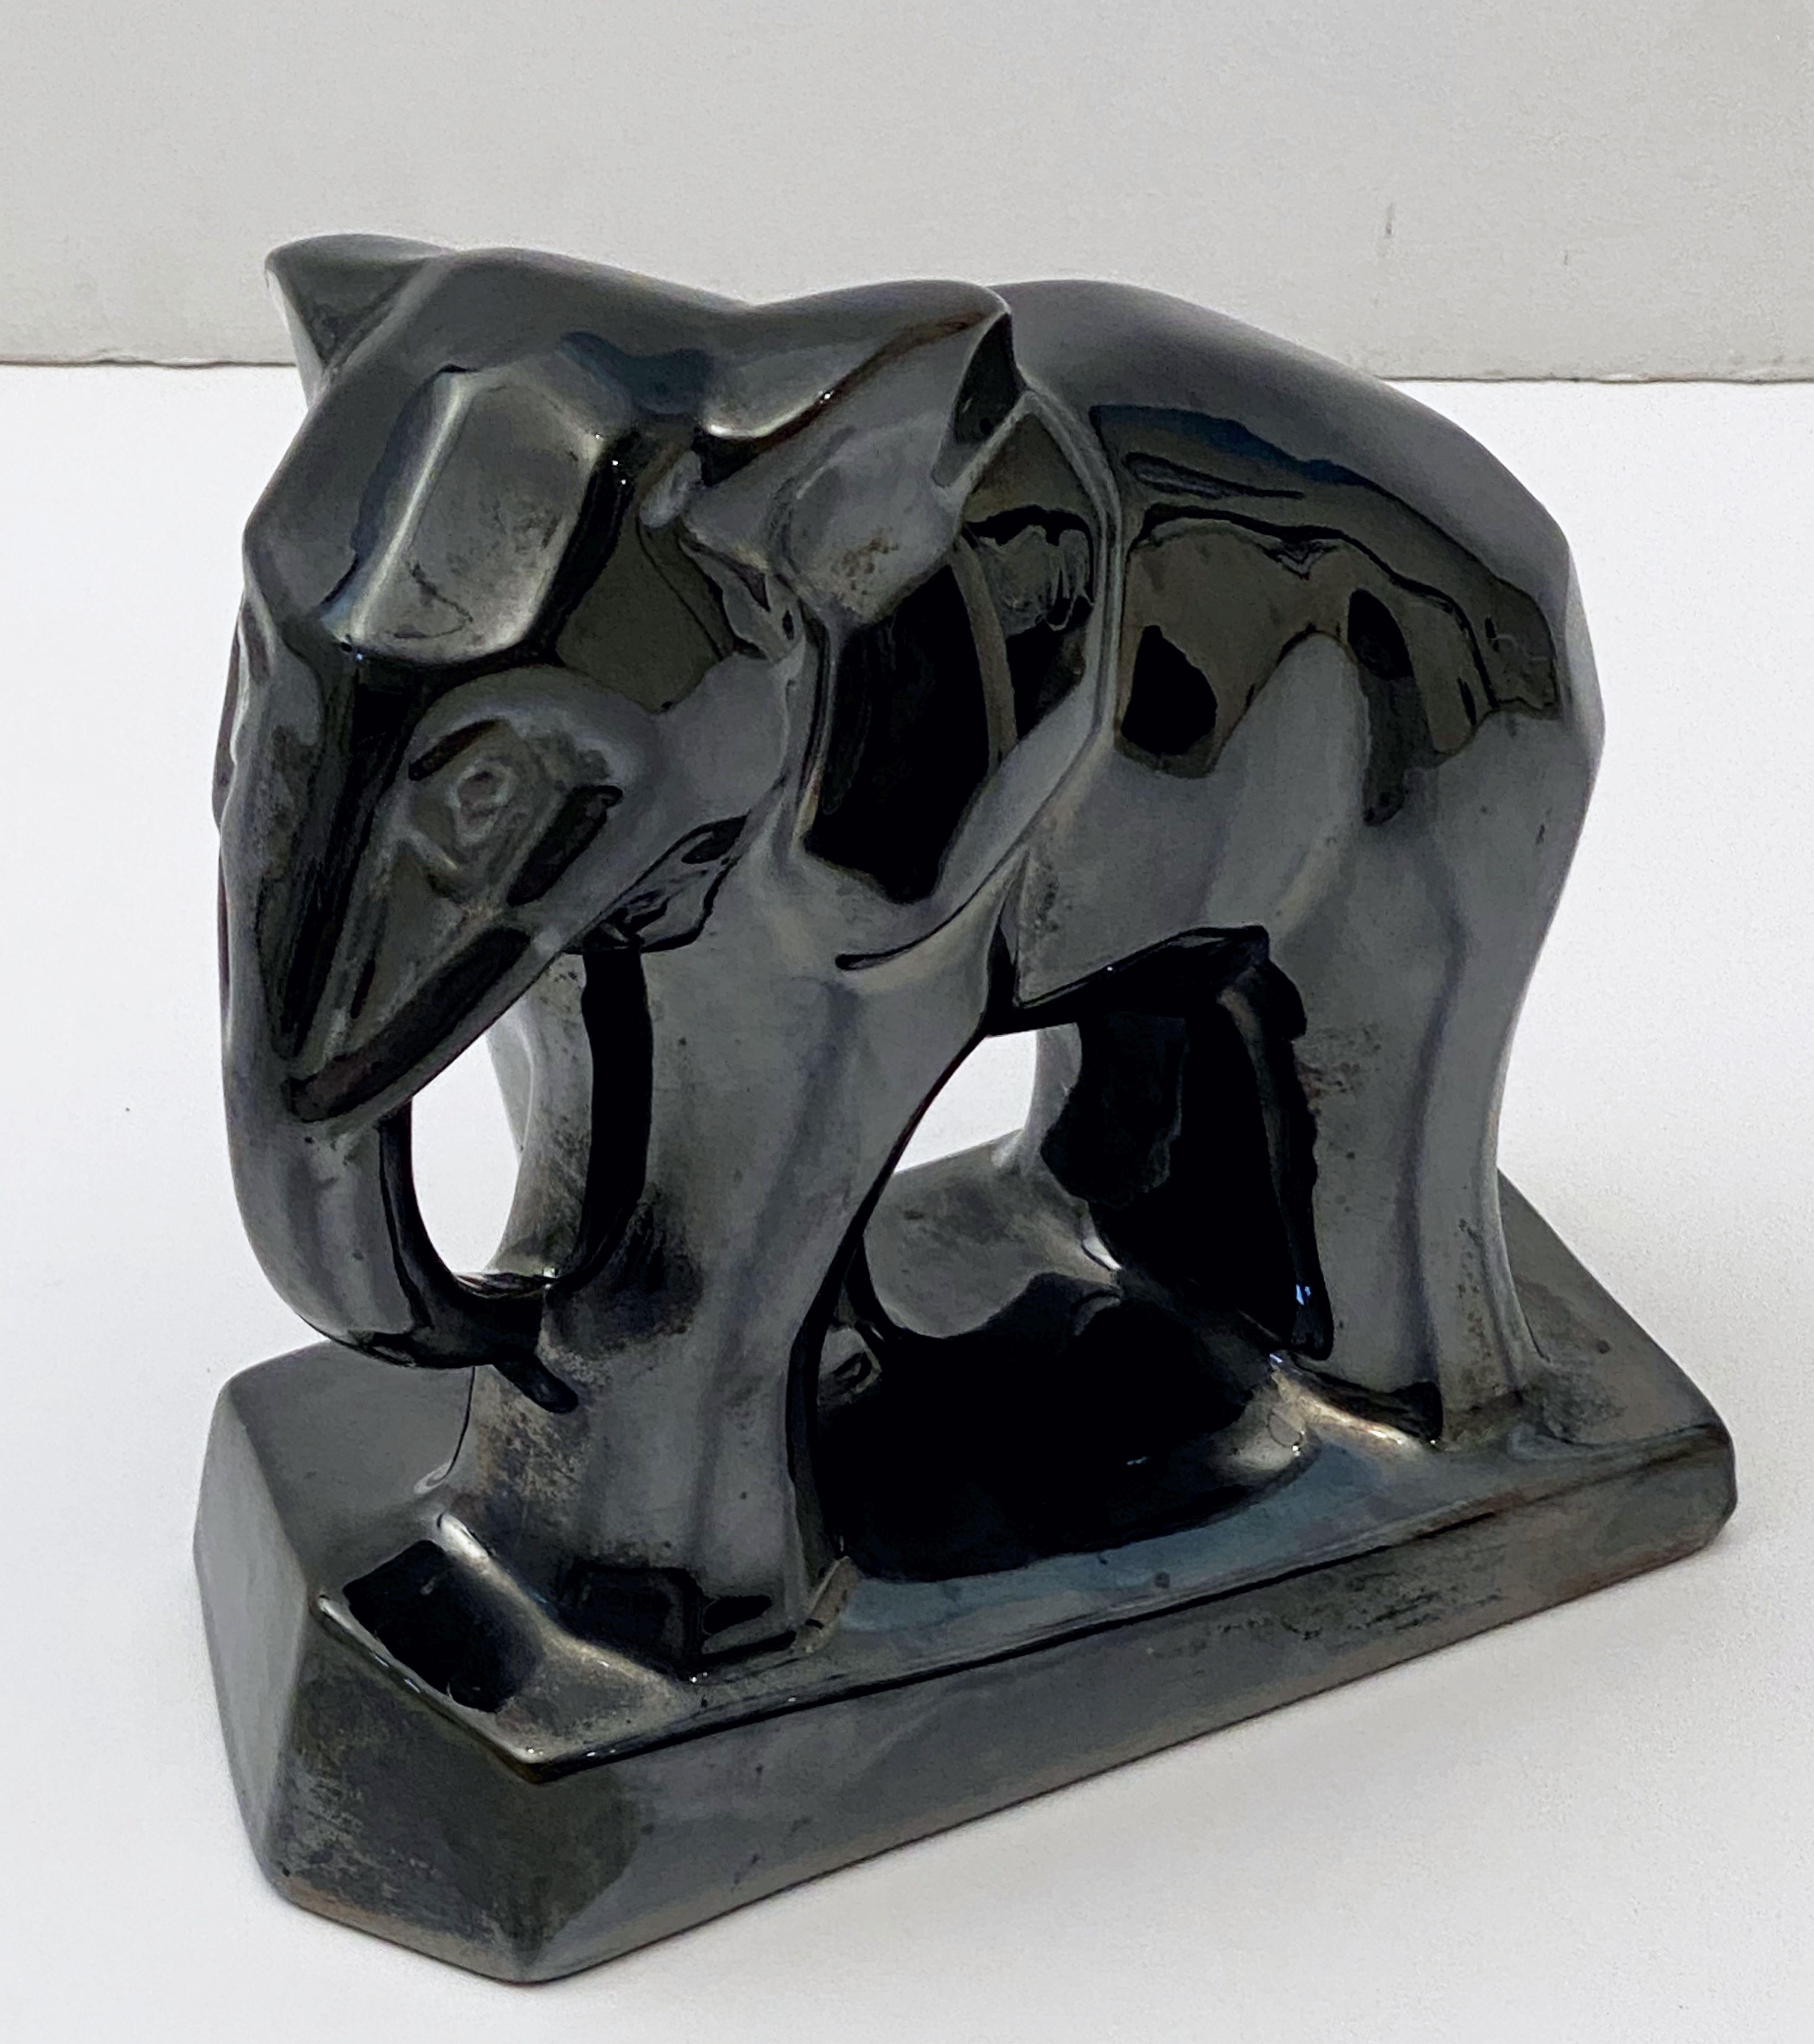 A fine French Art Deco elephant figurine in the cubist style with a lustrous, iridescent black ceramic glaze.

   